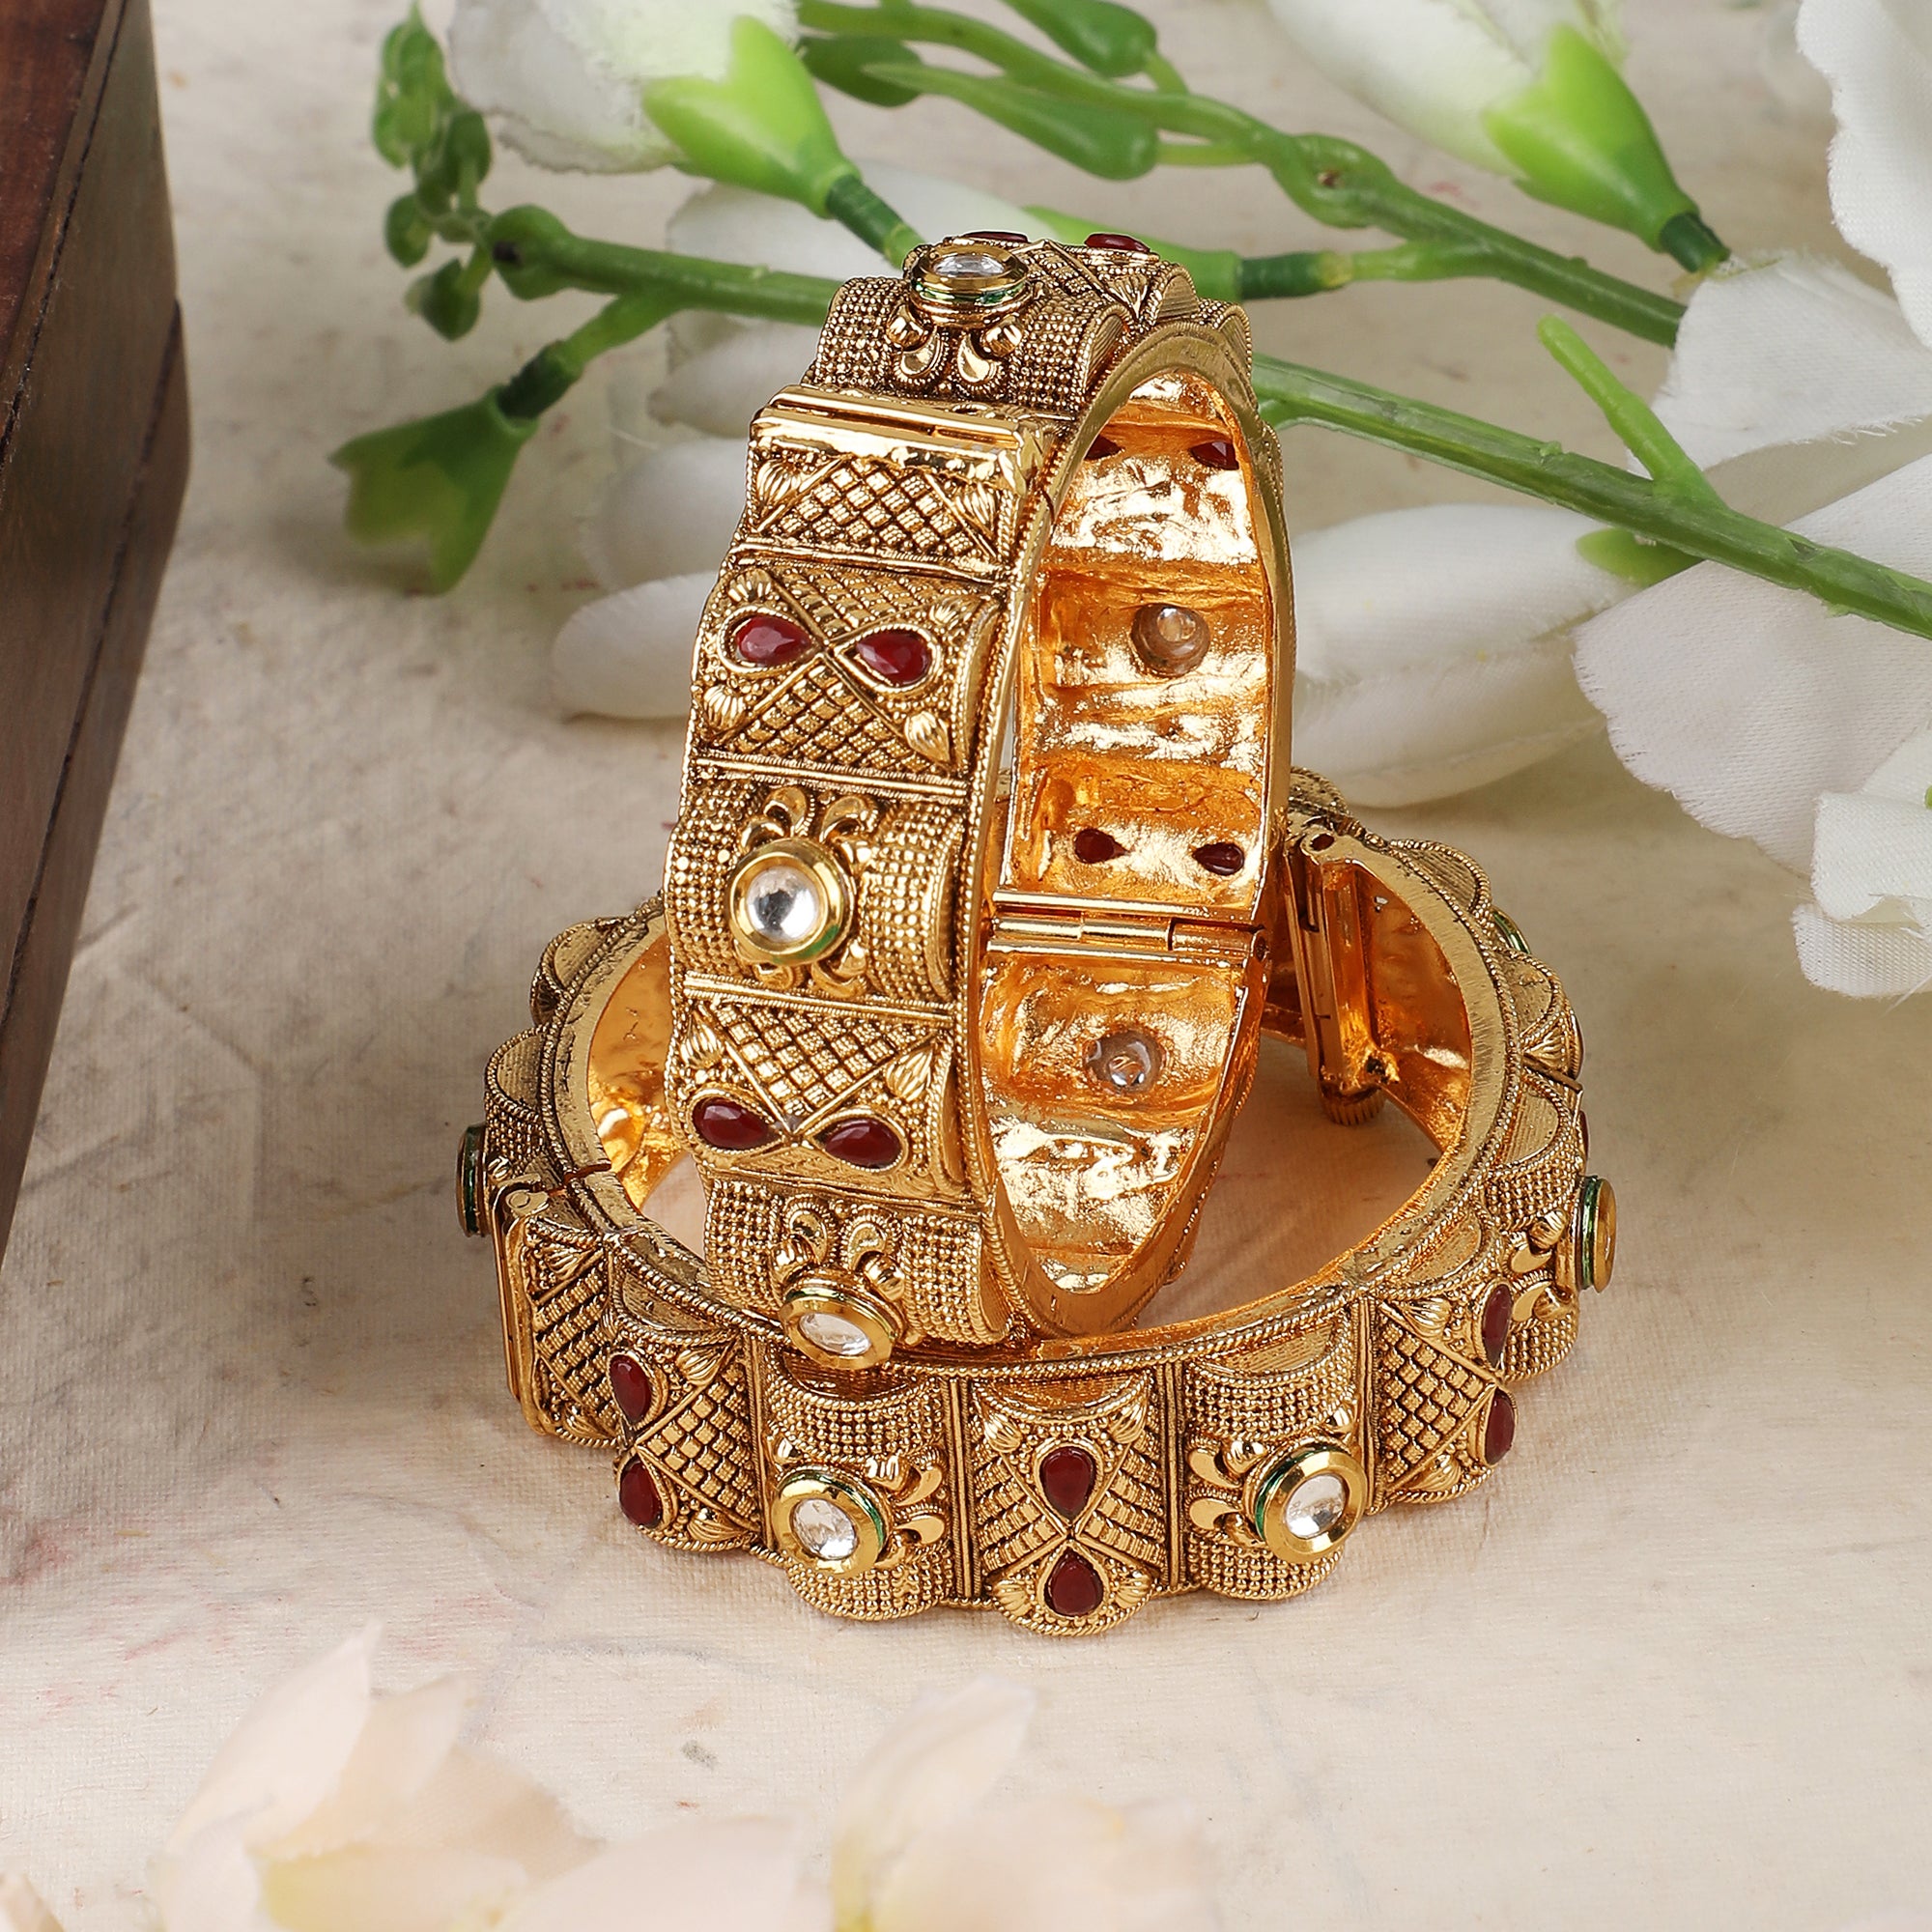 Women's Set Of 2 24 Ct Gold-Plated & Red Stone-Studded Bangles - Anikas Creation